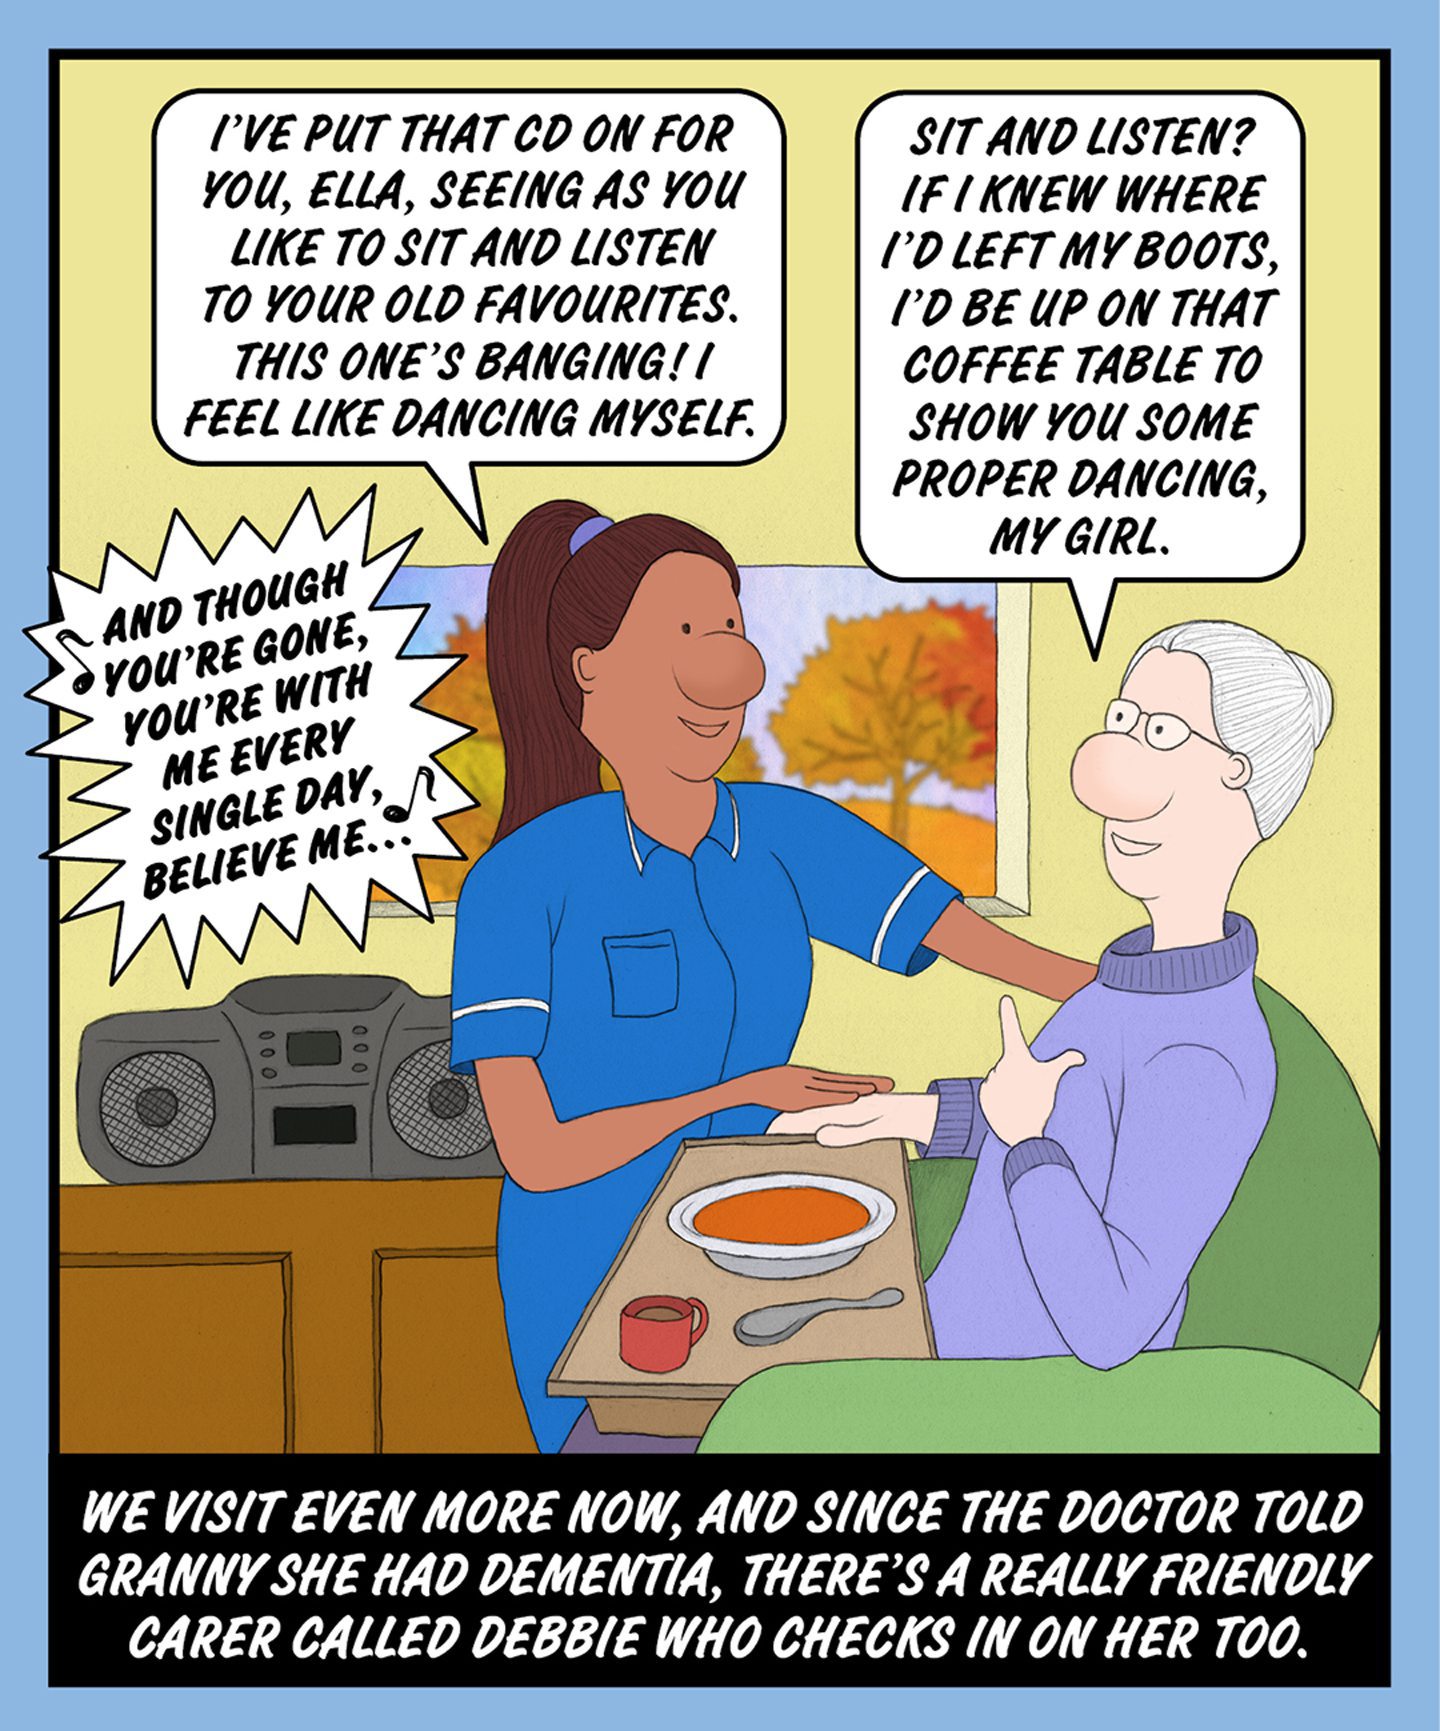 A comic illustration of a nurse helping a granny as she sits and eats soup. The speech bubble from the nurse reads: I'VE PUT THAT CD ON FOR YOU, ELLA, SEEING AS YOU LIKE TO SIT AND LISTEN TO YOUR OLD FAVOURITES. THIS ONE'S BANGING! I FEEL LIKE DANCING MYSELF The speech bubble from the granny reads: SIT AND LISTEN? IF I KNEW WHERE I'D LEFT MY BOOTS, I'D BE UP ON THAT COFFEE TABLE TO SHOW YOU SOME PROPER DANCING, MY GIRL. The text below the image reads: WE VISIT EVEN MORE, NOW, AND SINCE THE DOCTOR TOLD HER GRANNY SHE HAD DEMENTIA, THERE'S A REALLY FRIENDLY CARER CALLED DEBBIE WHO CHECKS IN ON HER TOO.